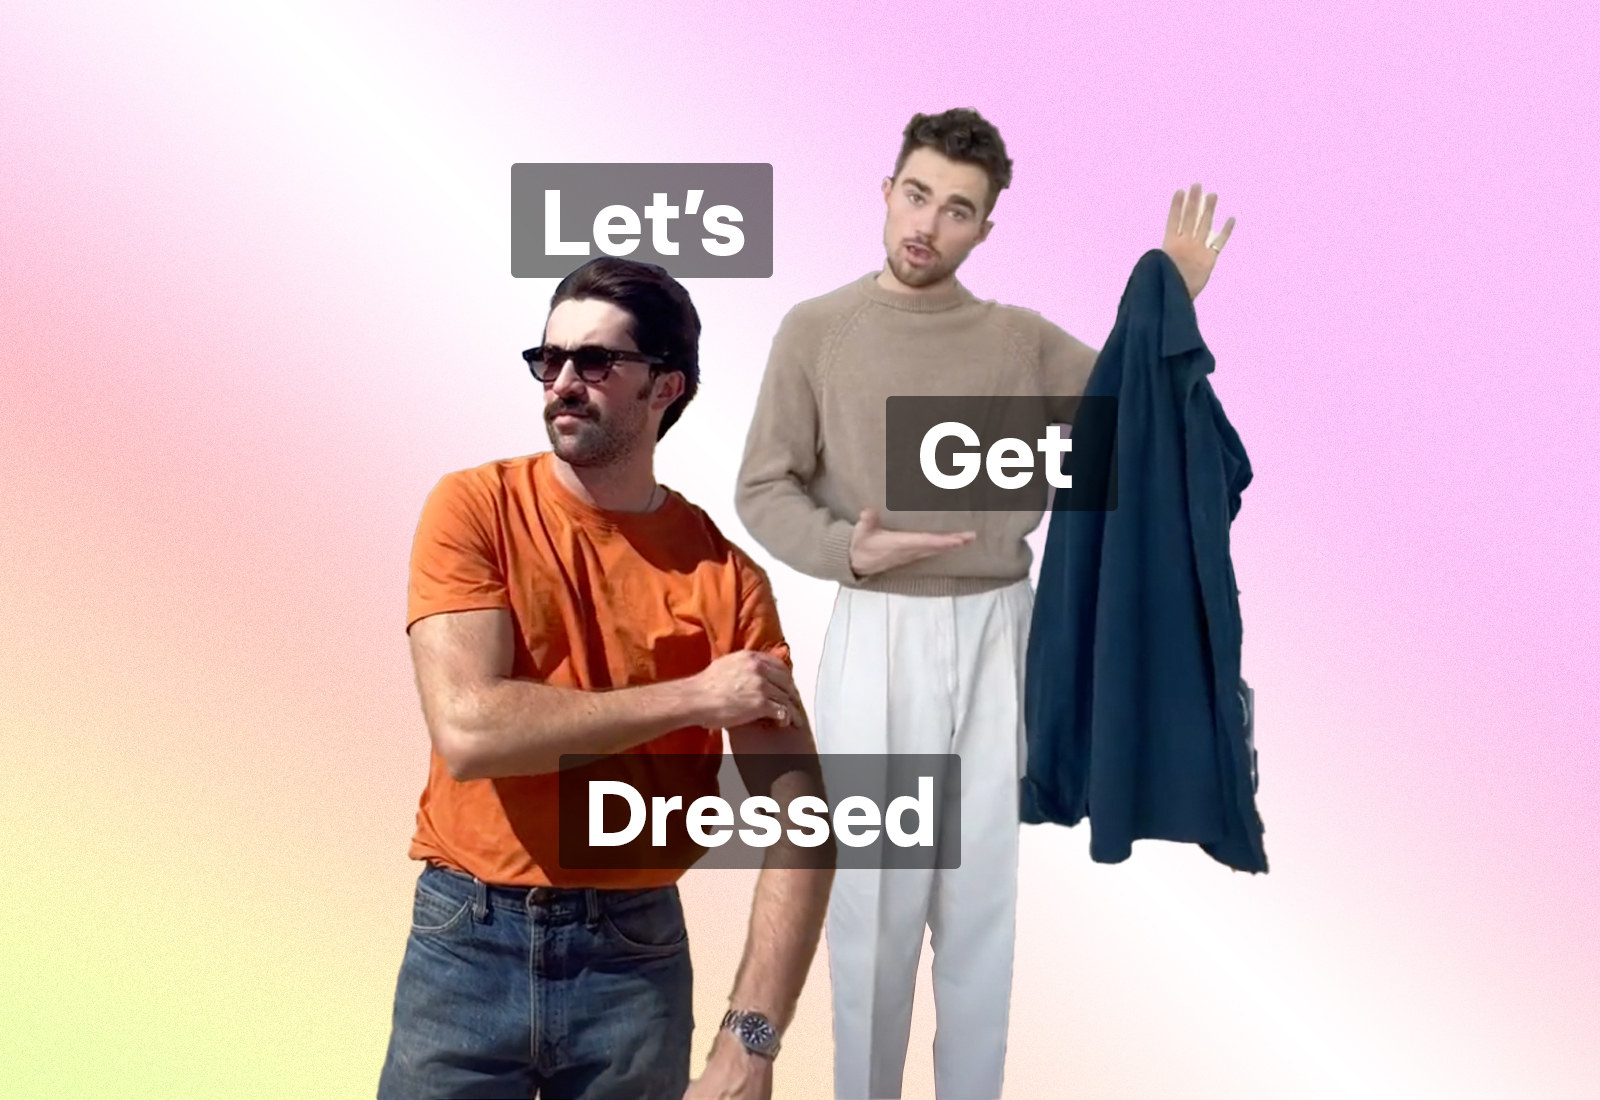 &quot;Let&#x27;s Get Dressed&quot; text with two men, one in a T-shirt and jeans and another in a sweater and holding up a jacket